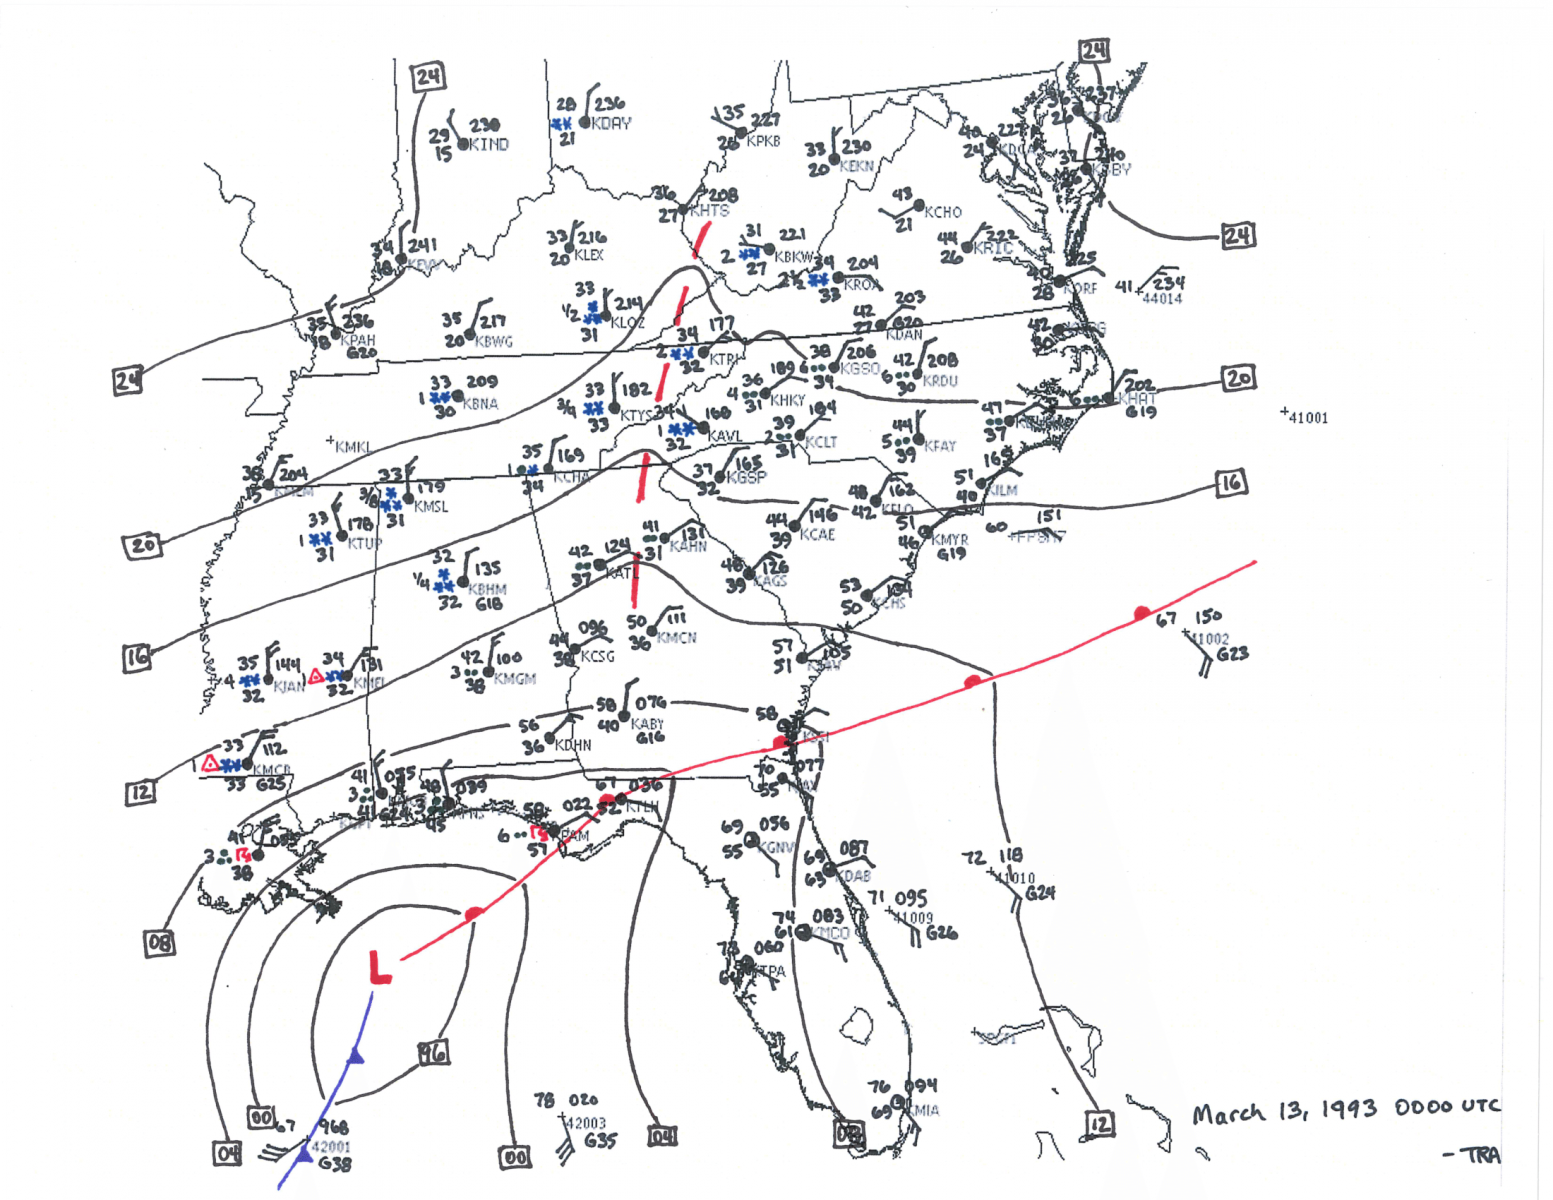 1993 Storm of the Century Surface Analysis at 7 PM March 13, 1993